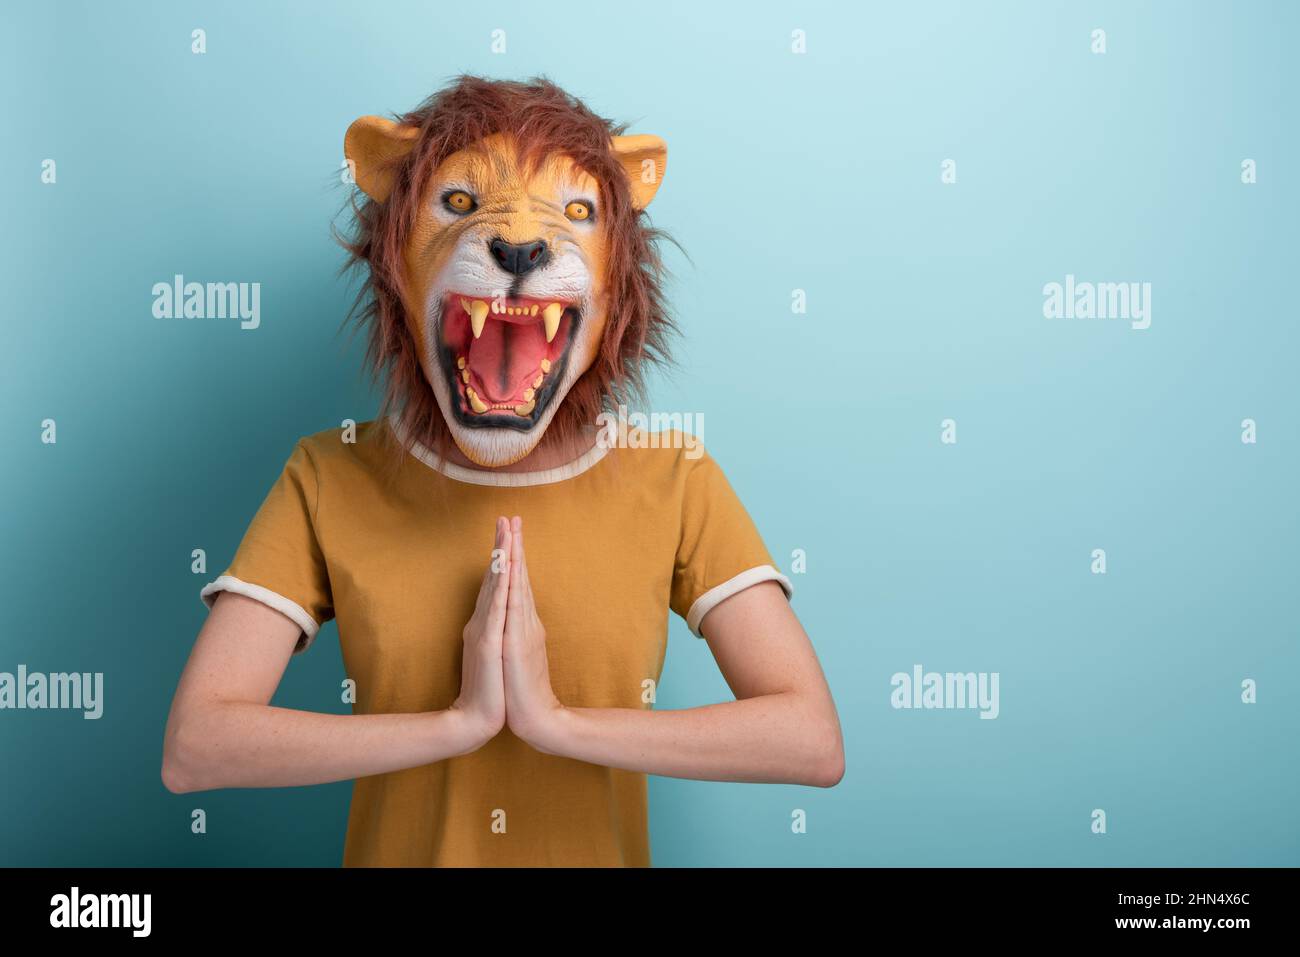 Young woman in lion mask hold her hands together in gratitude or prayer sign, isolated on blue background with copy-space. Stock Photo